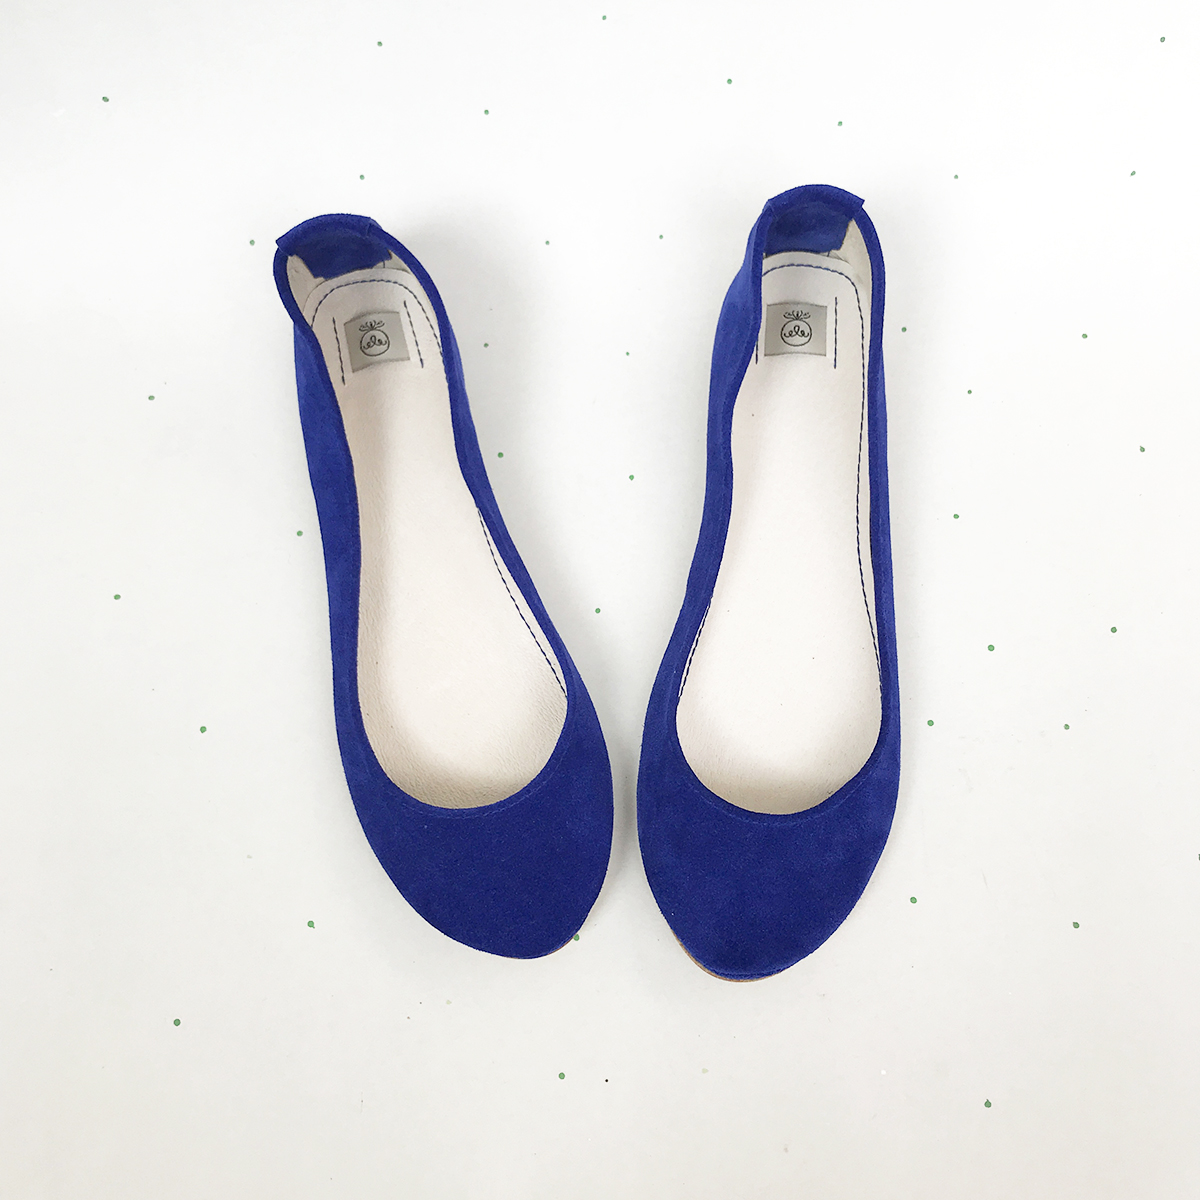 ROUND BALLET FLATS IN ROYAL BLUE SOFT LEATHER — Ele Handmade Shoes